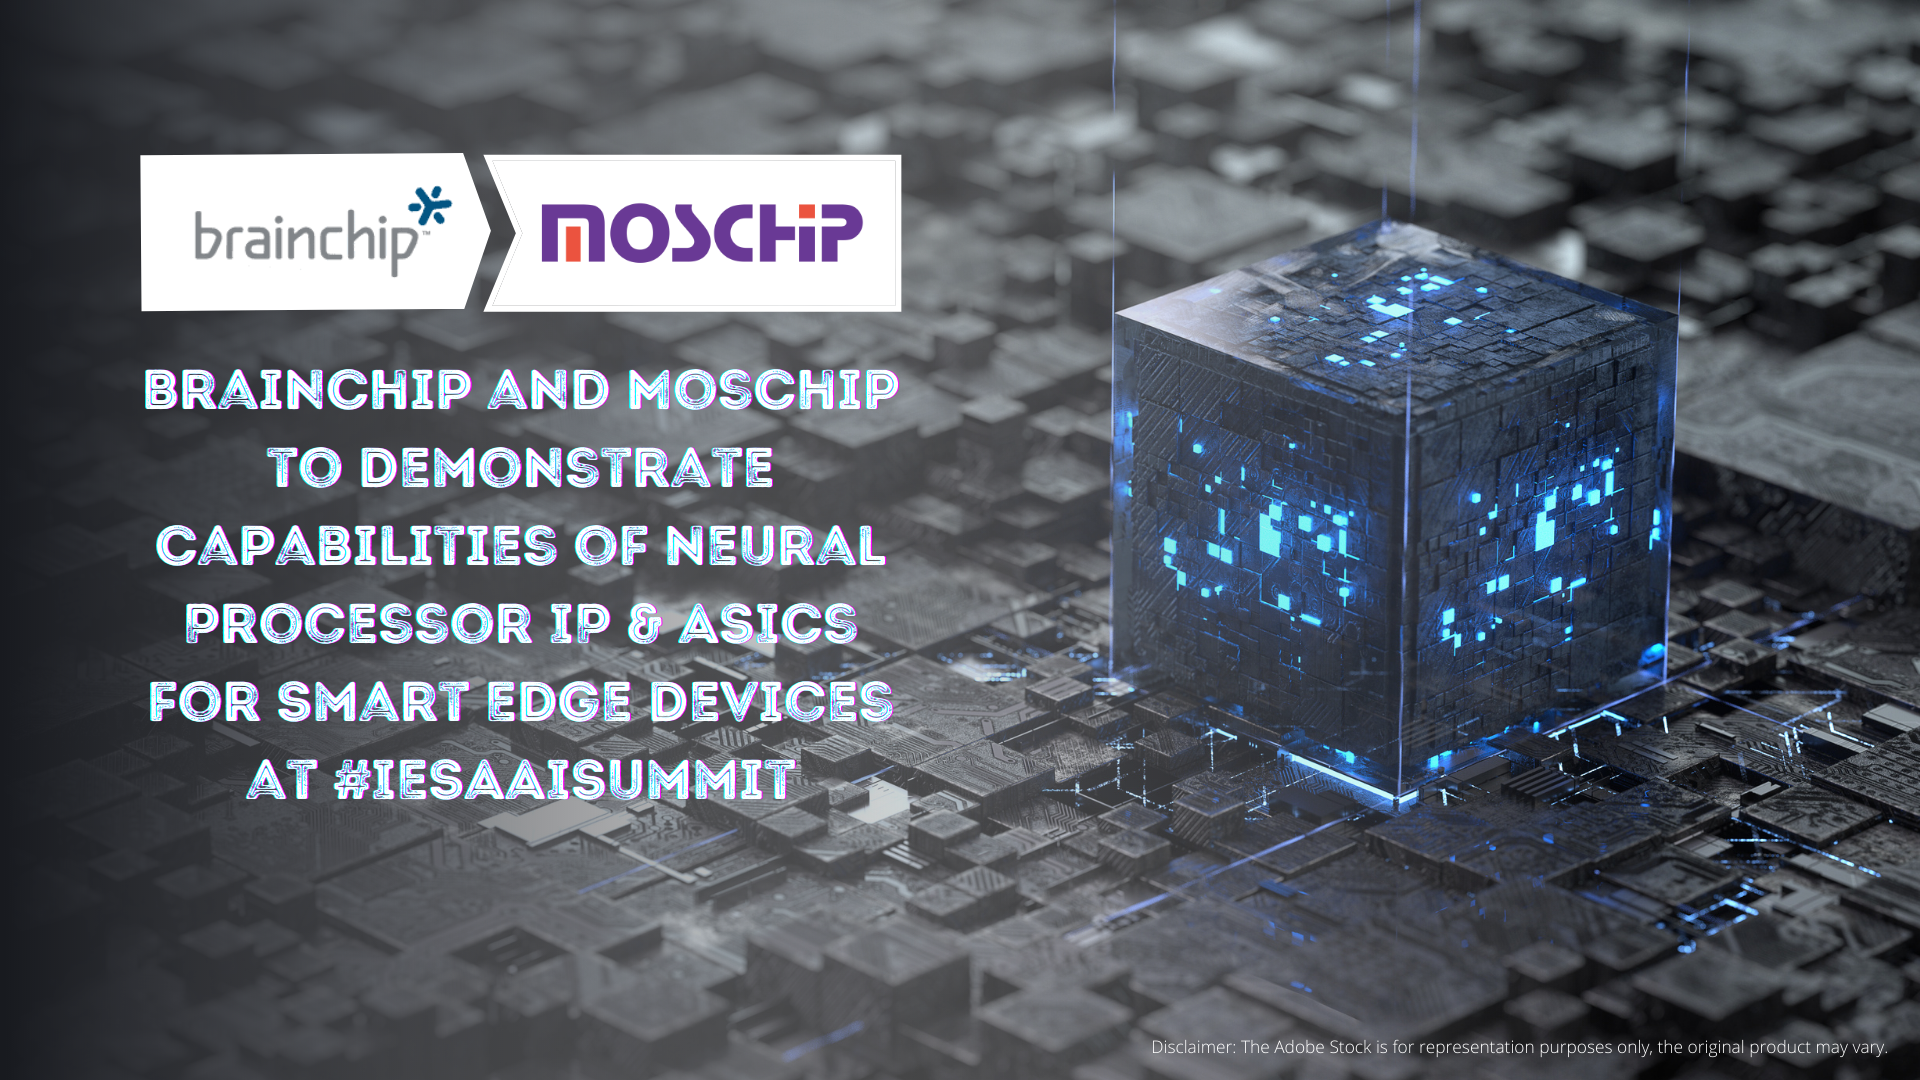 BrainChip and MosChip to Demonstrate Capabilities of Neural Processor IP & ASICs for Smart Edge Devices at IESA AI Summit